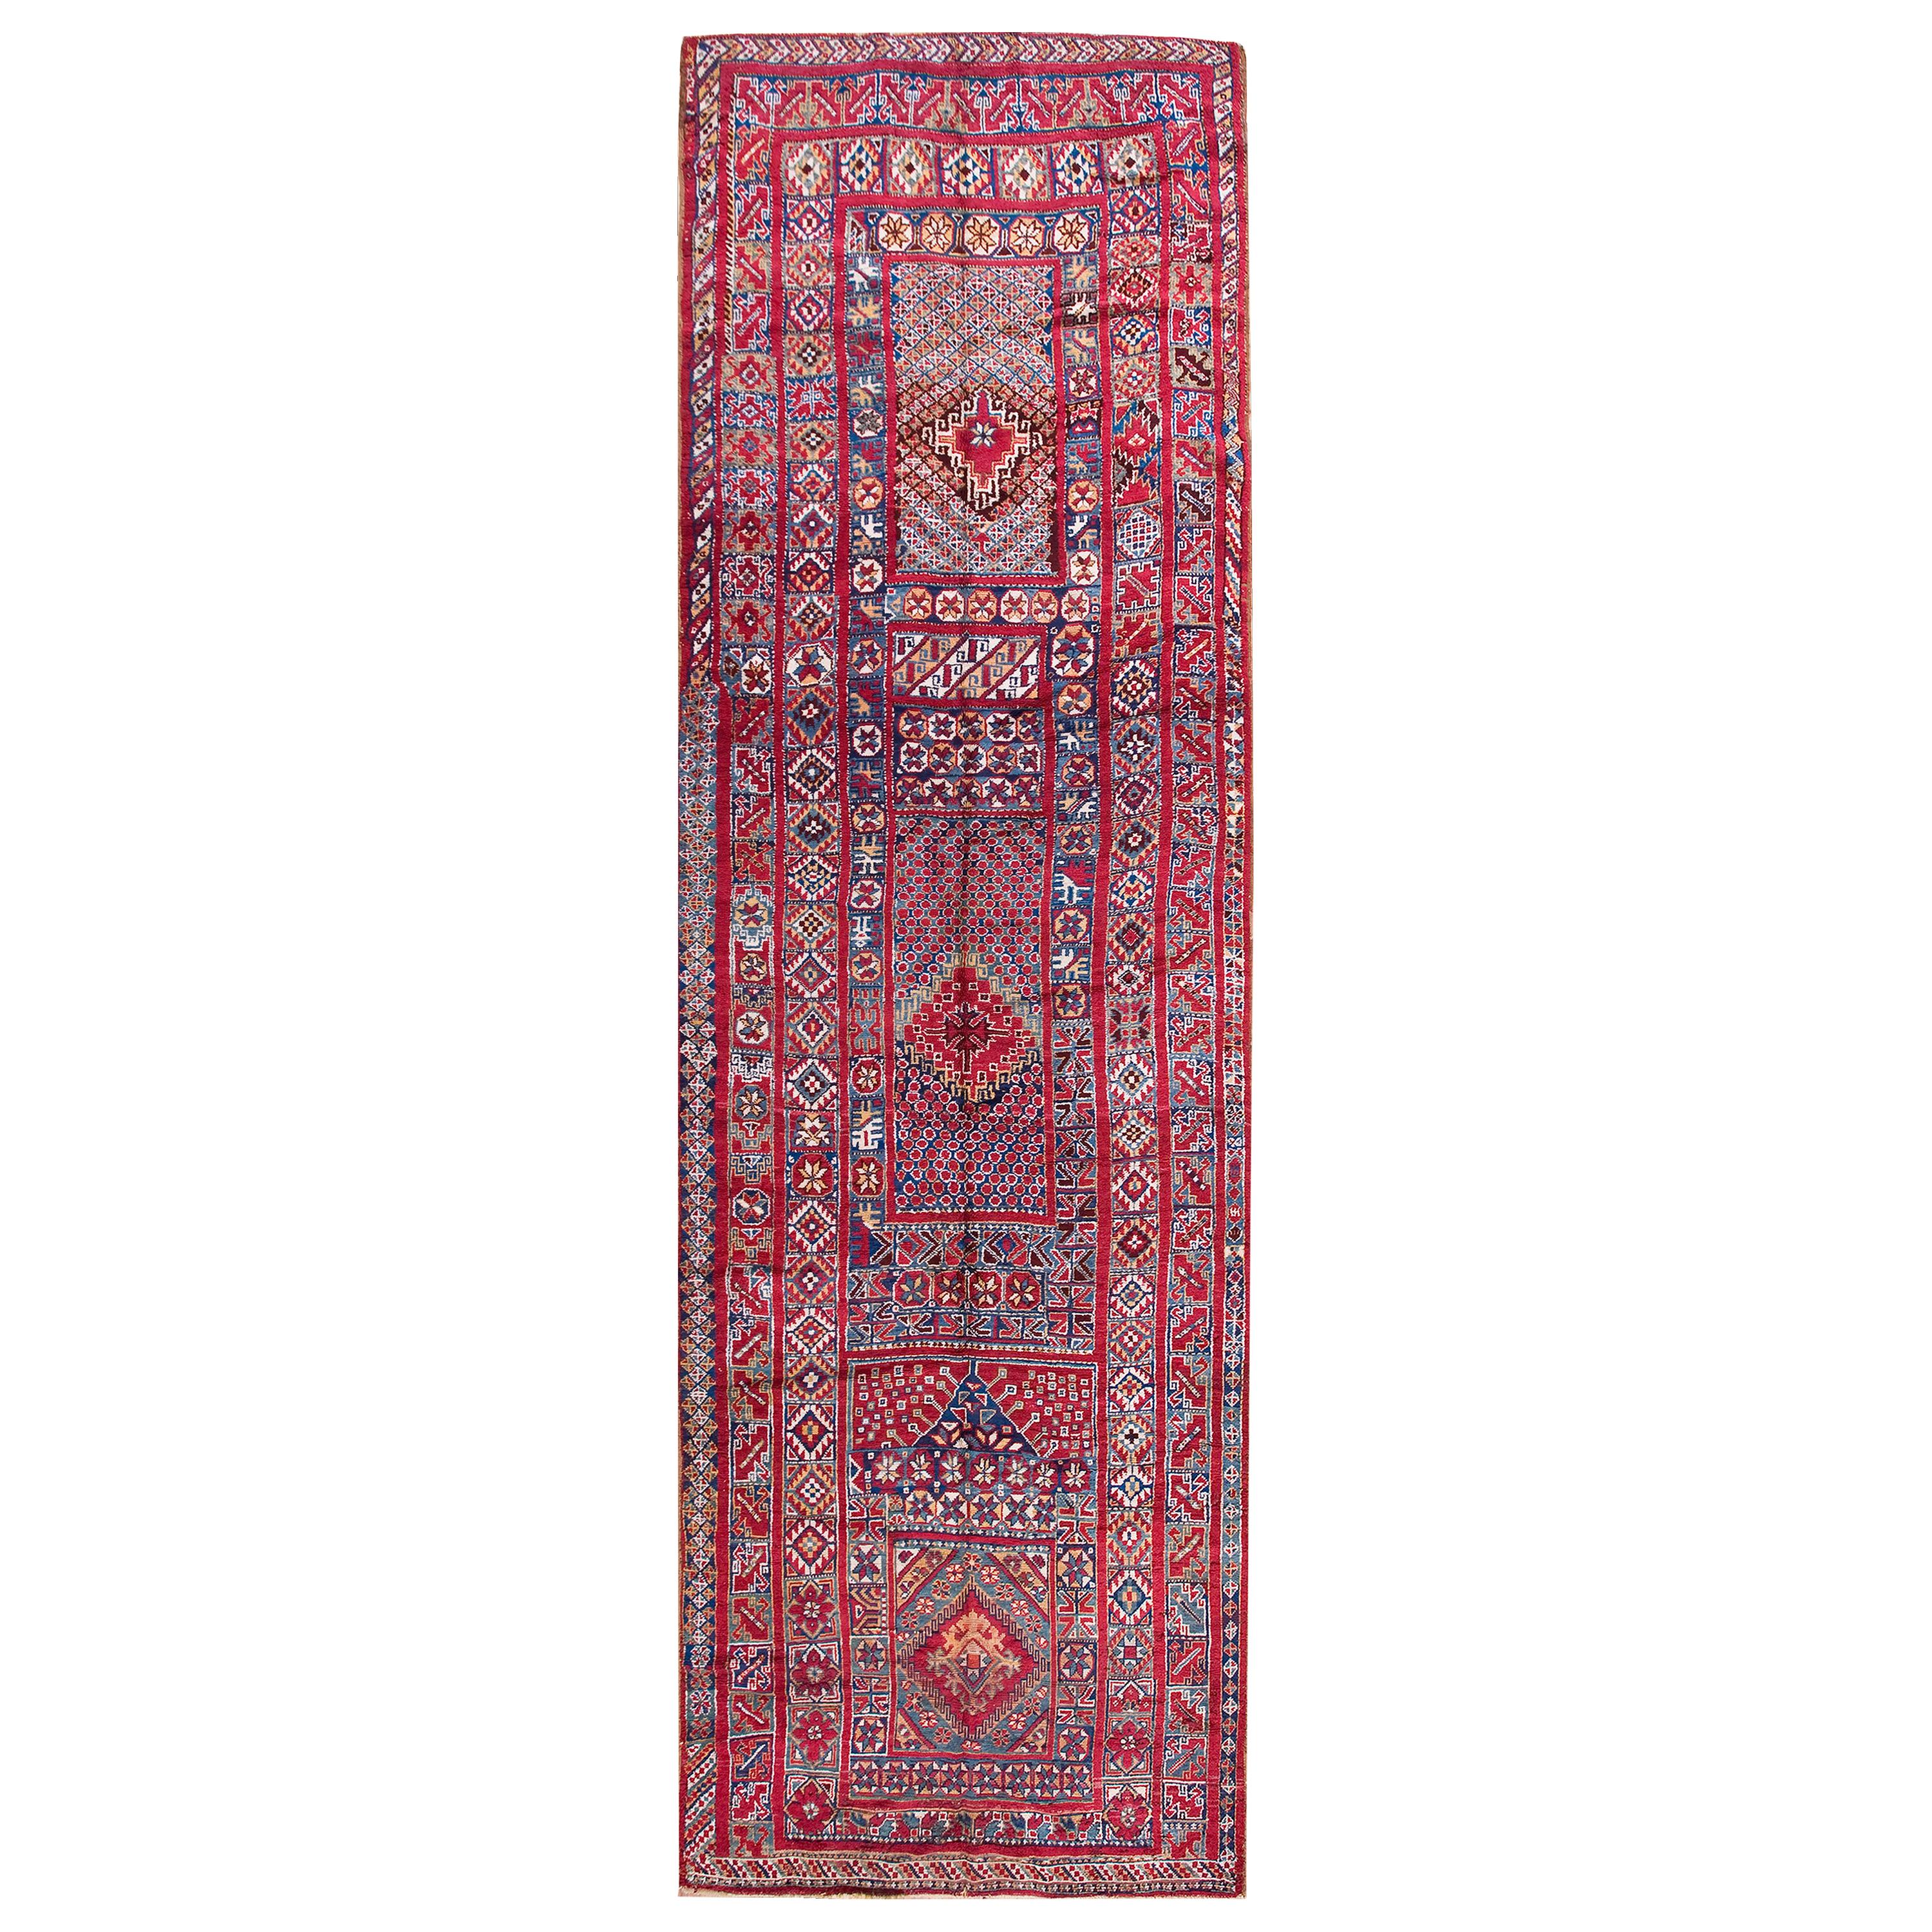 Antique Moroccan Rug For Sale